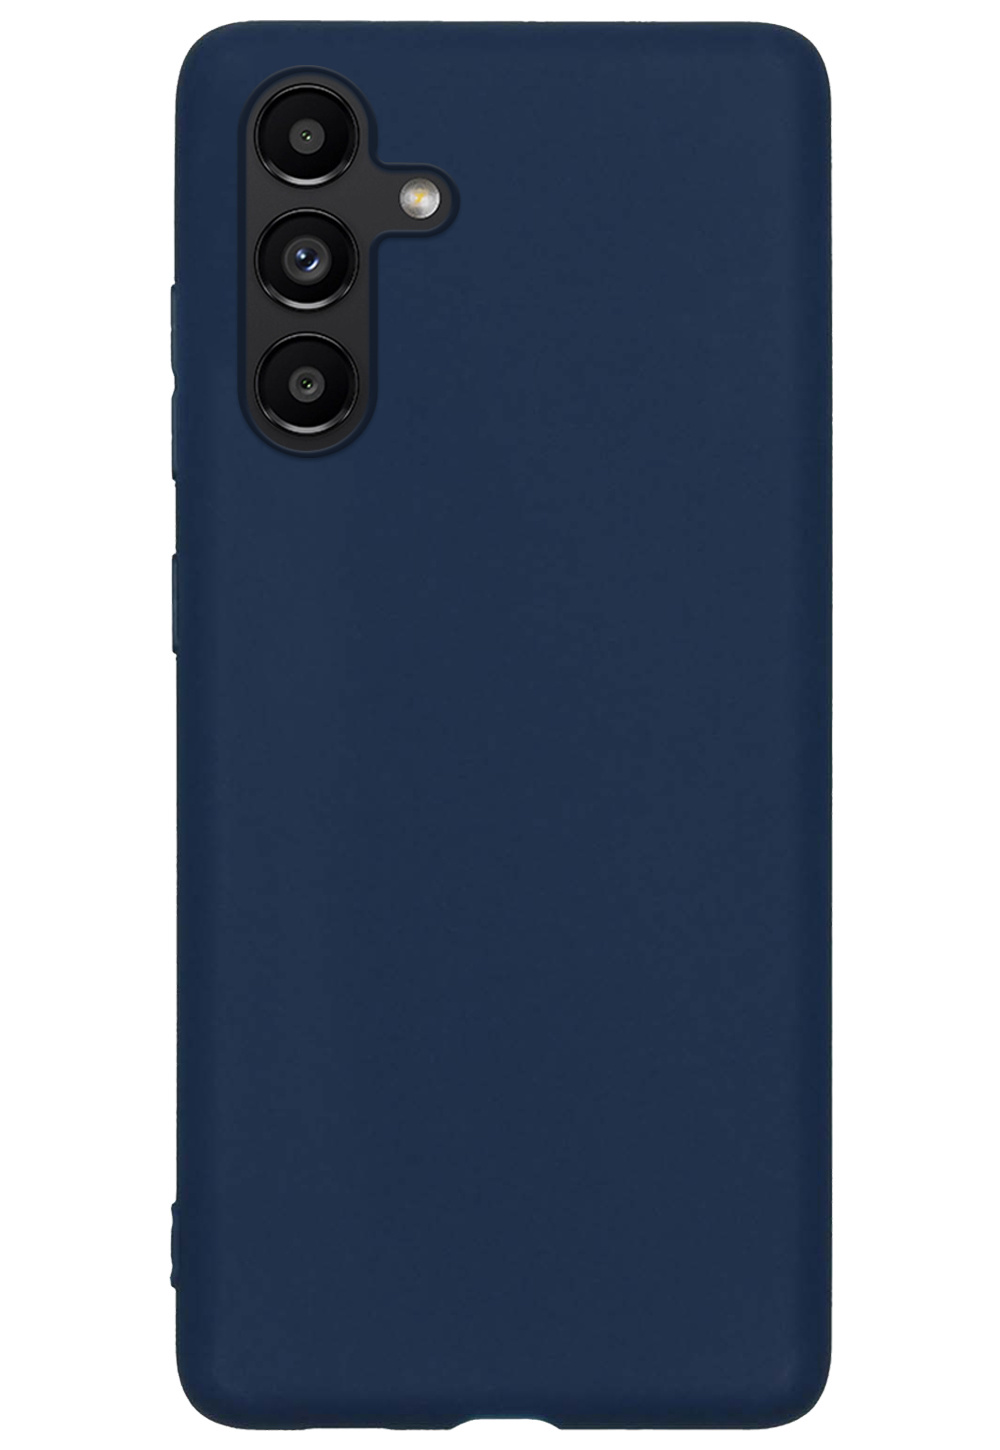 Nomfy Samsung Galaxy A13 5G Hoesje Siliconen - Samsung Galaxy Galaxy A13 5G Hoesje Donker Blauw Case - Samsung Galaxy Galaxy A13 5G Cover Siliconen Back Cover -Donker Blauw